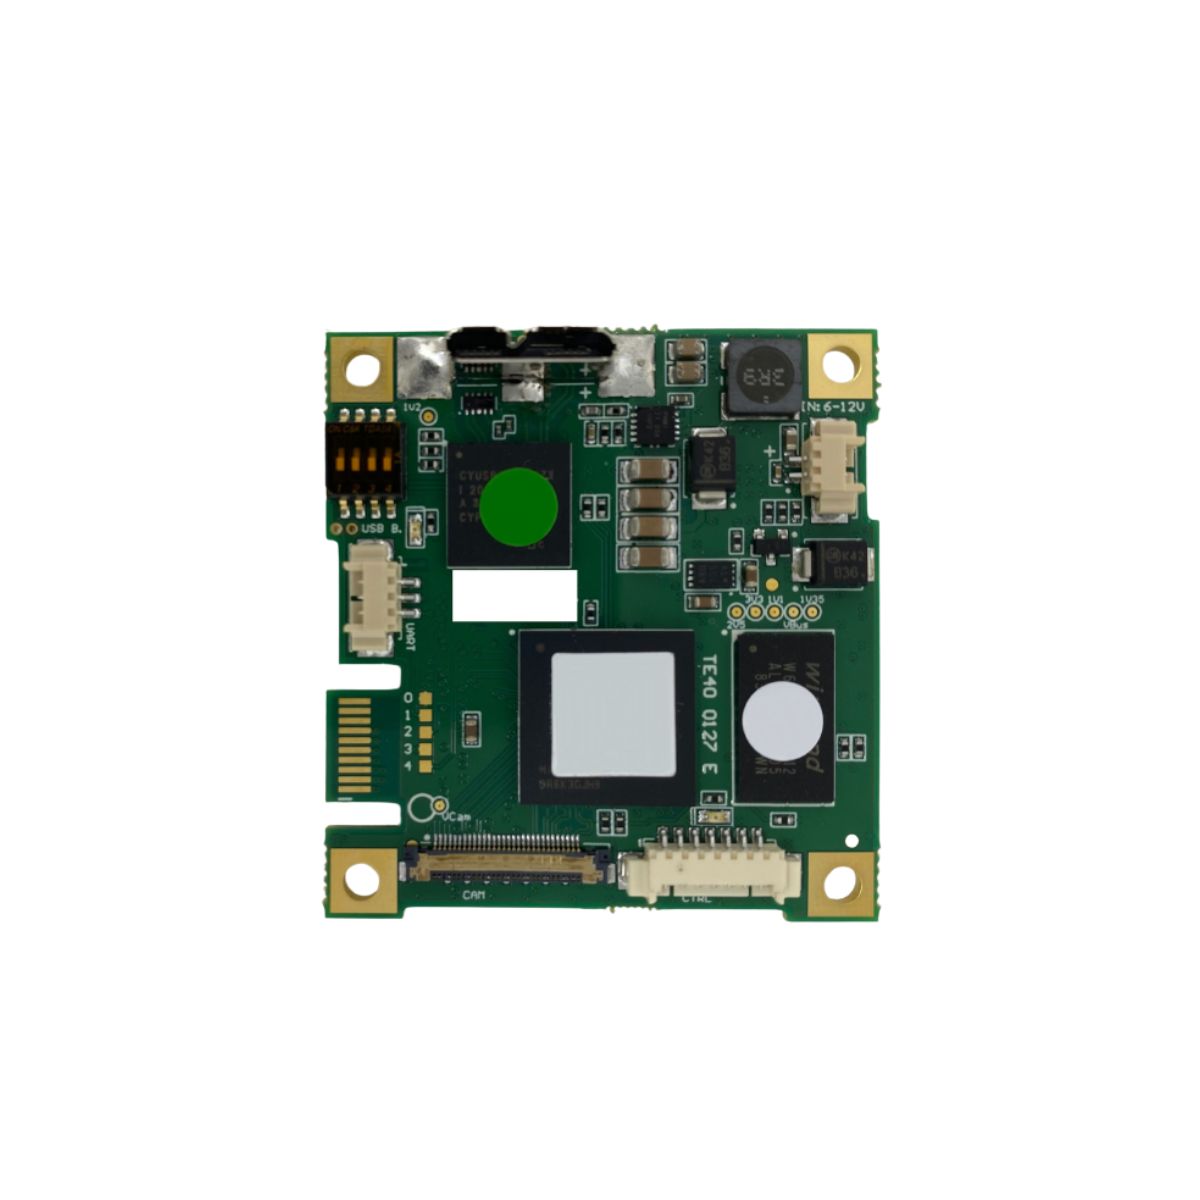 USB 3.0 Interface Boards For HD Block Cameras Top View